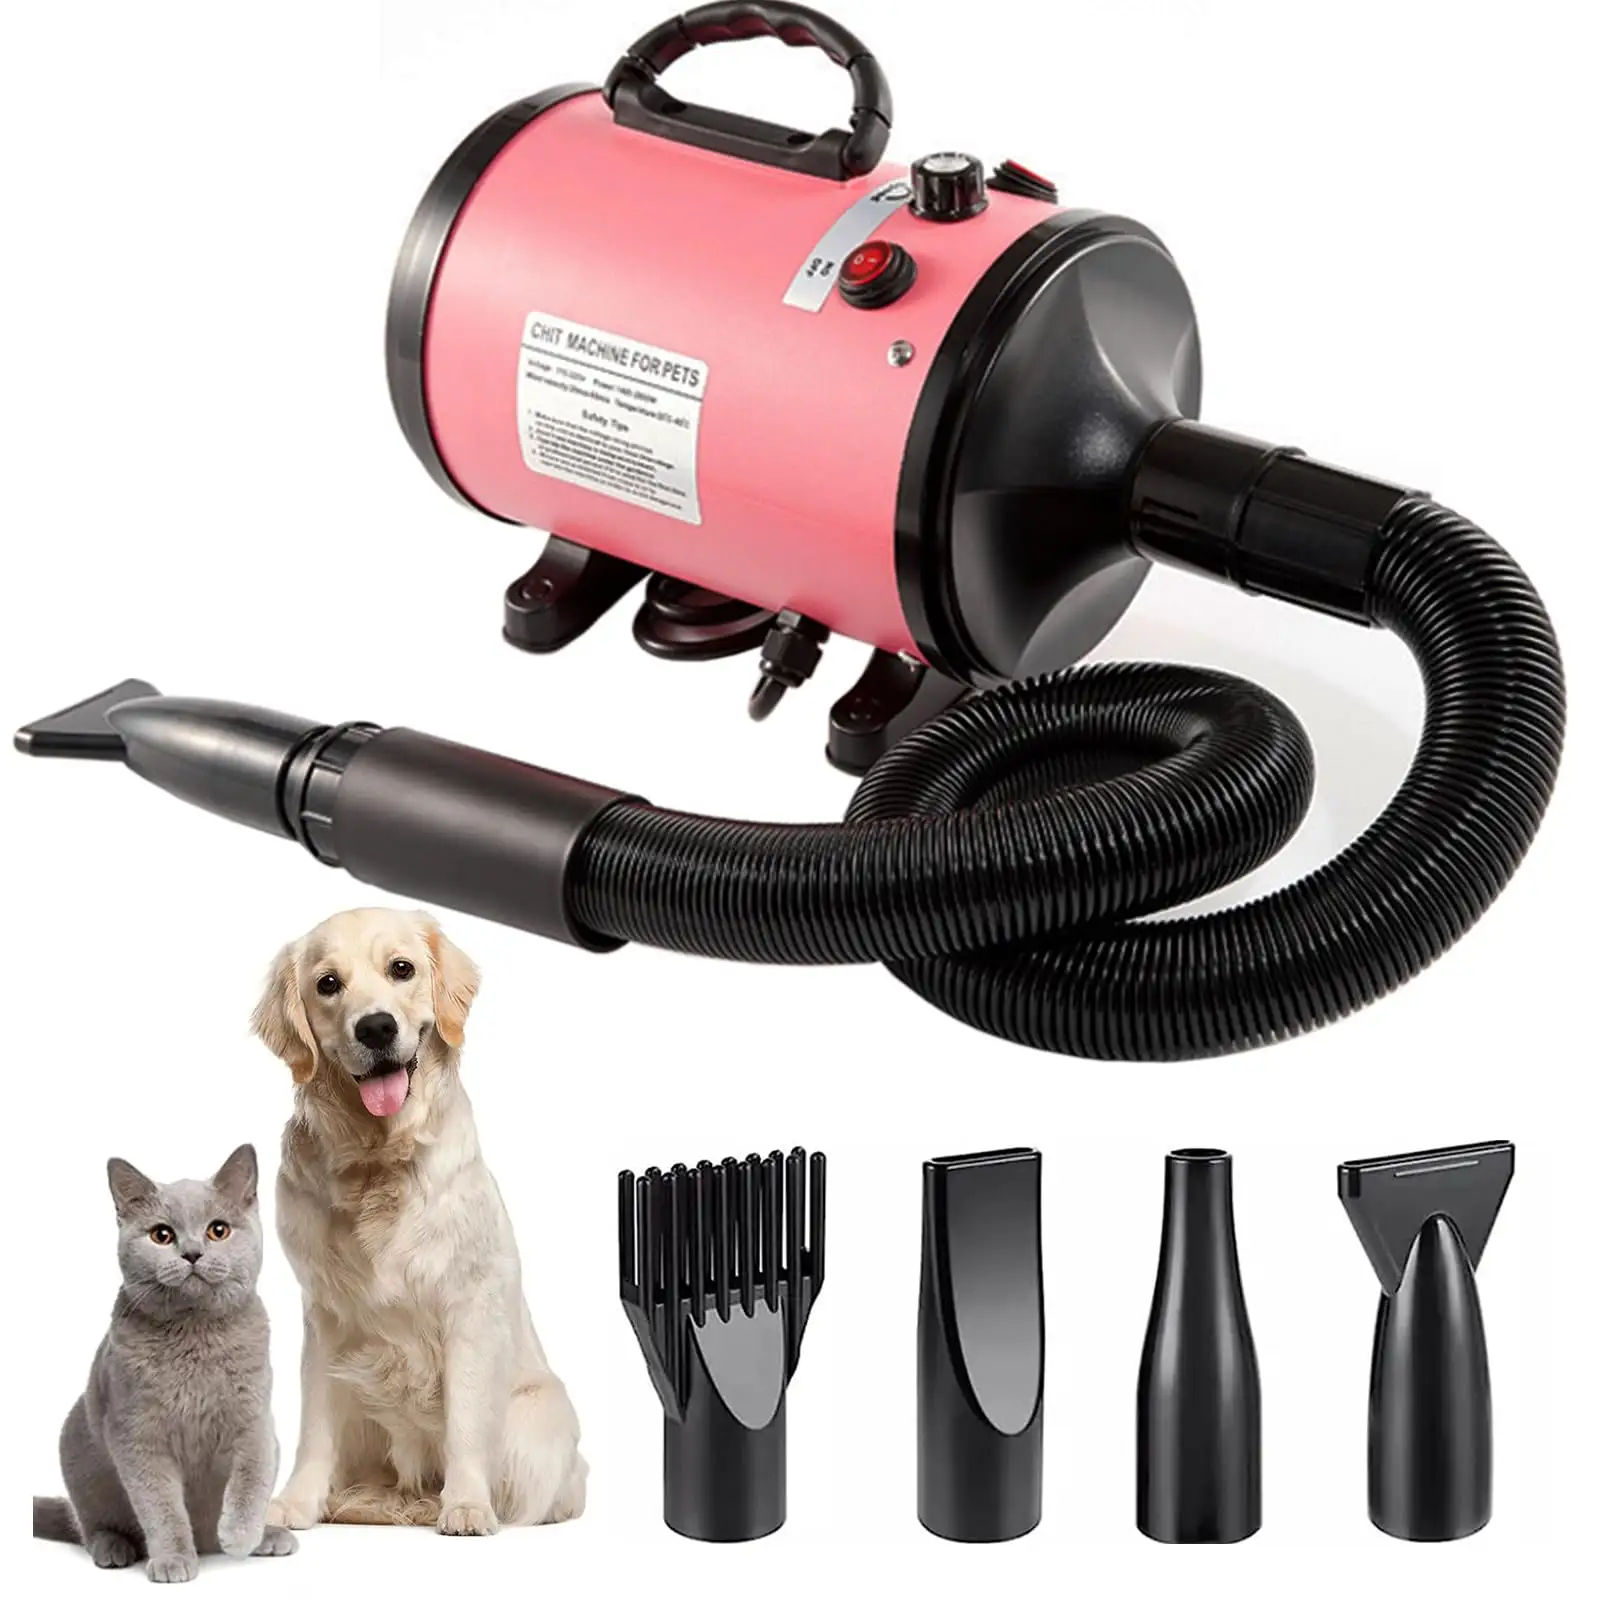 Pet Grooming Dryer with Adjustable Speed and Temperature Control Dog Blow Dryer Pet Hair Dryer with 3 Nozzle